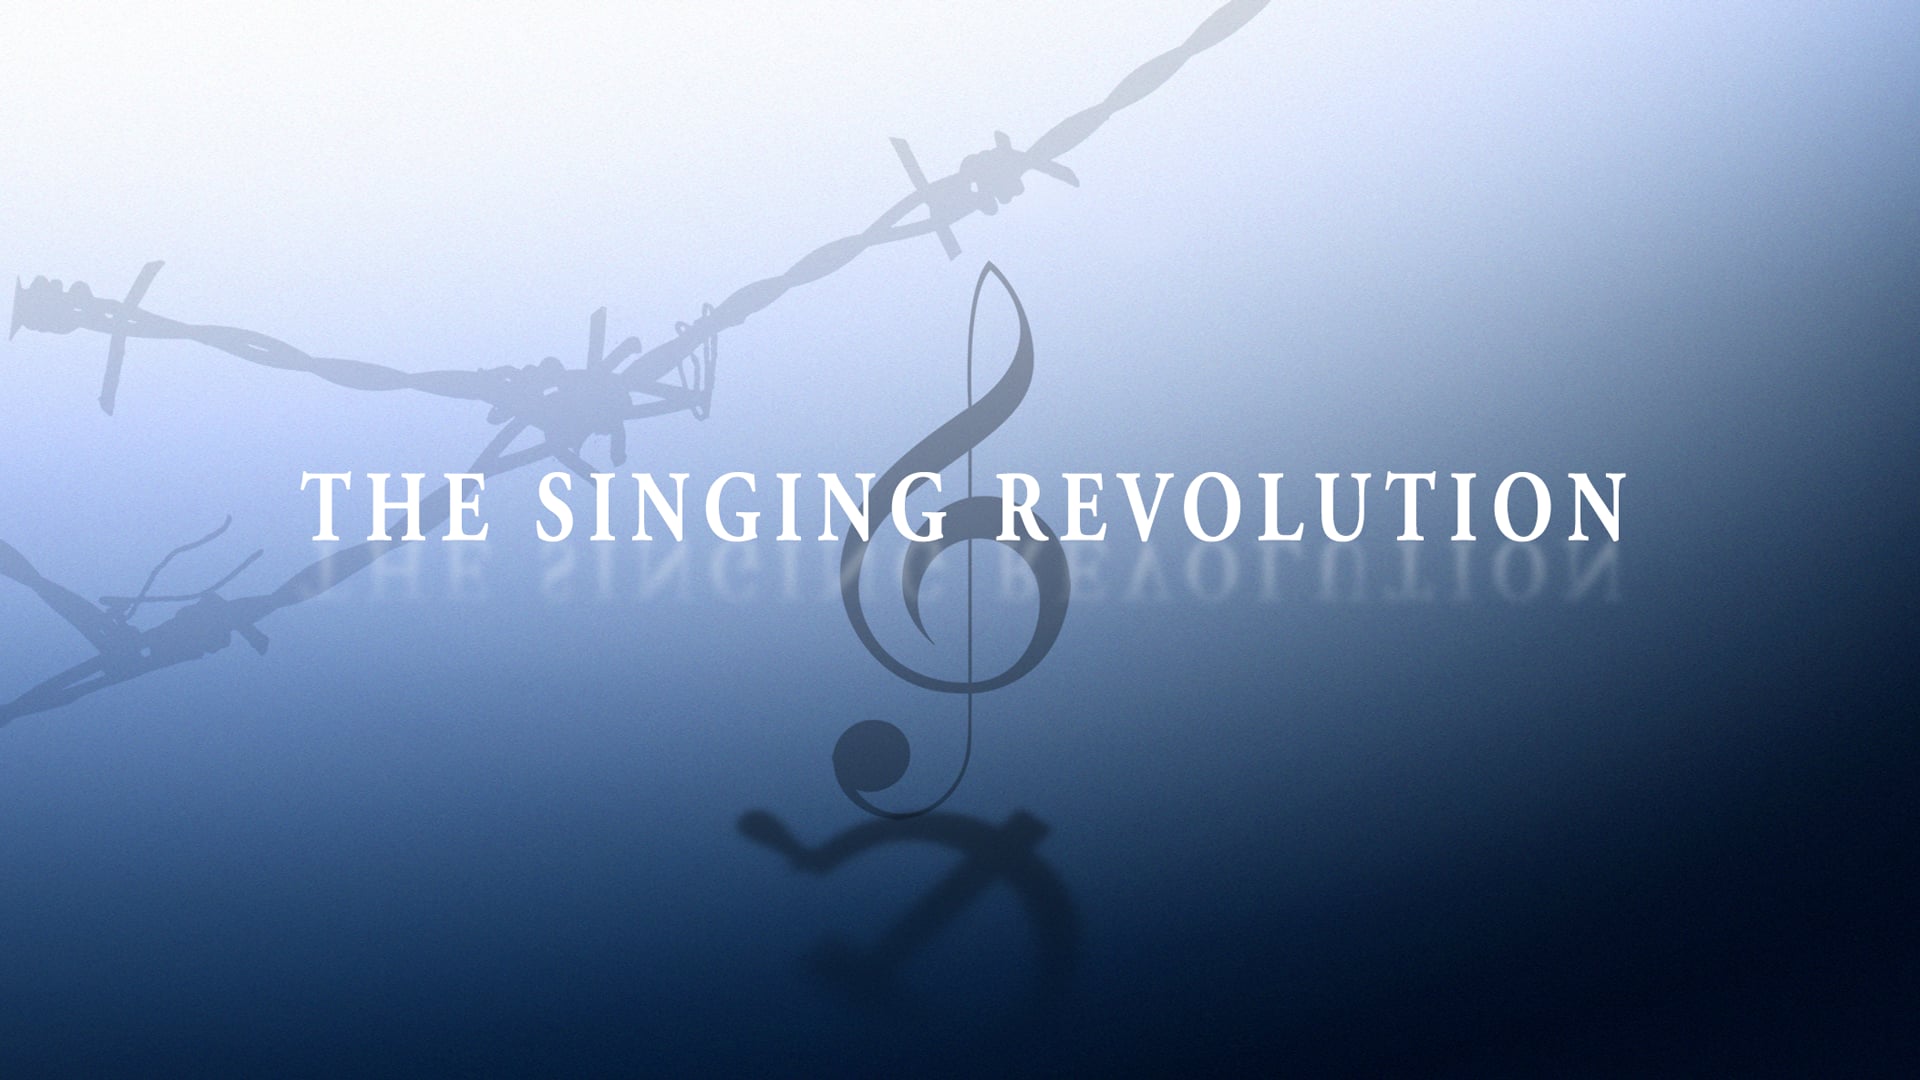 Watch The Singing Revolution Directors Commentary Online Vimeo On Demand on Vimeo